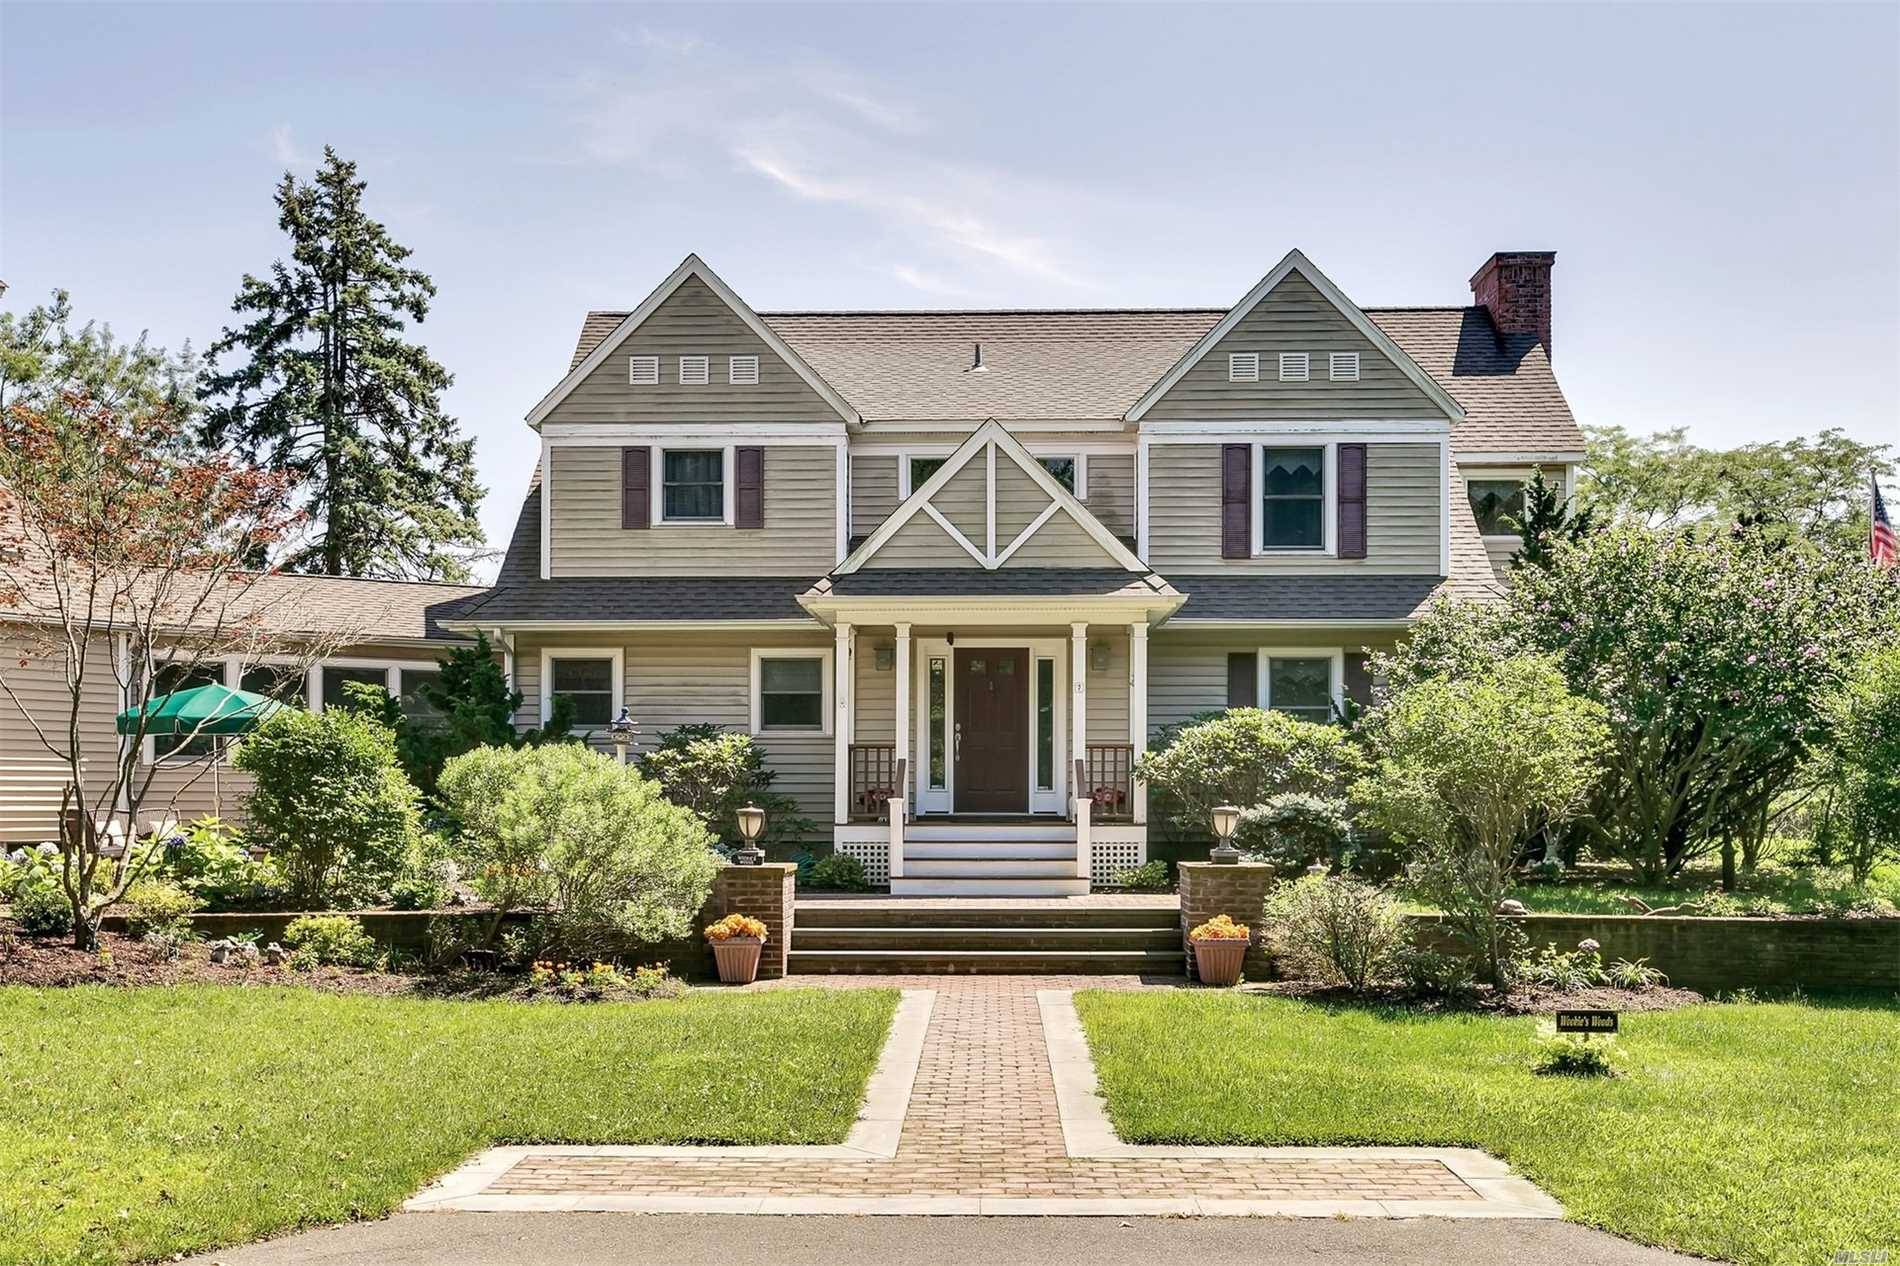 One Of A Kind: Two Houses In One Building With Views Of Moriches Bay, 5 Brs, 4.